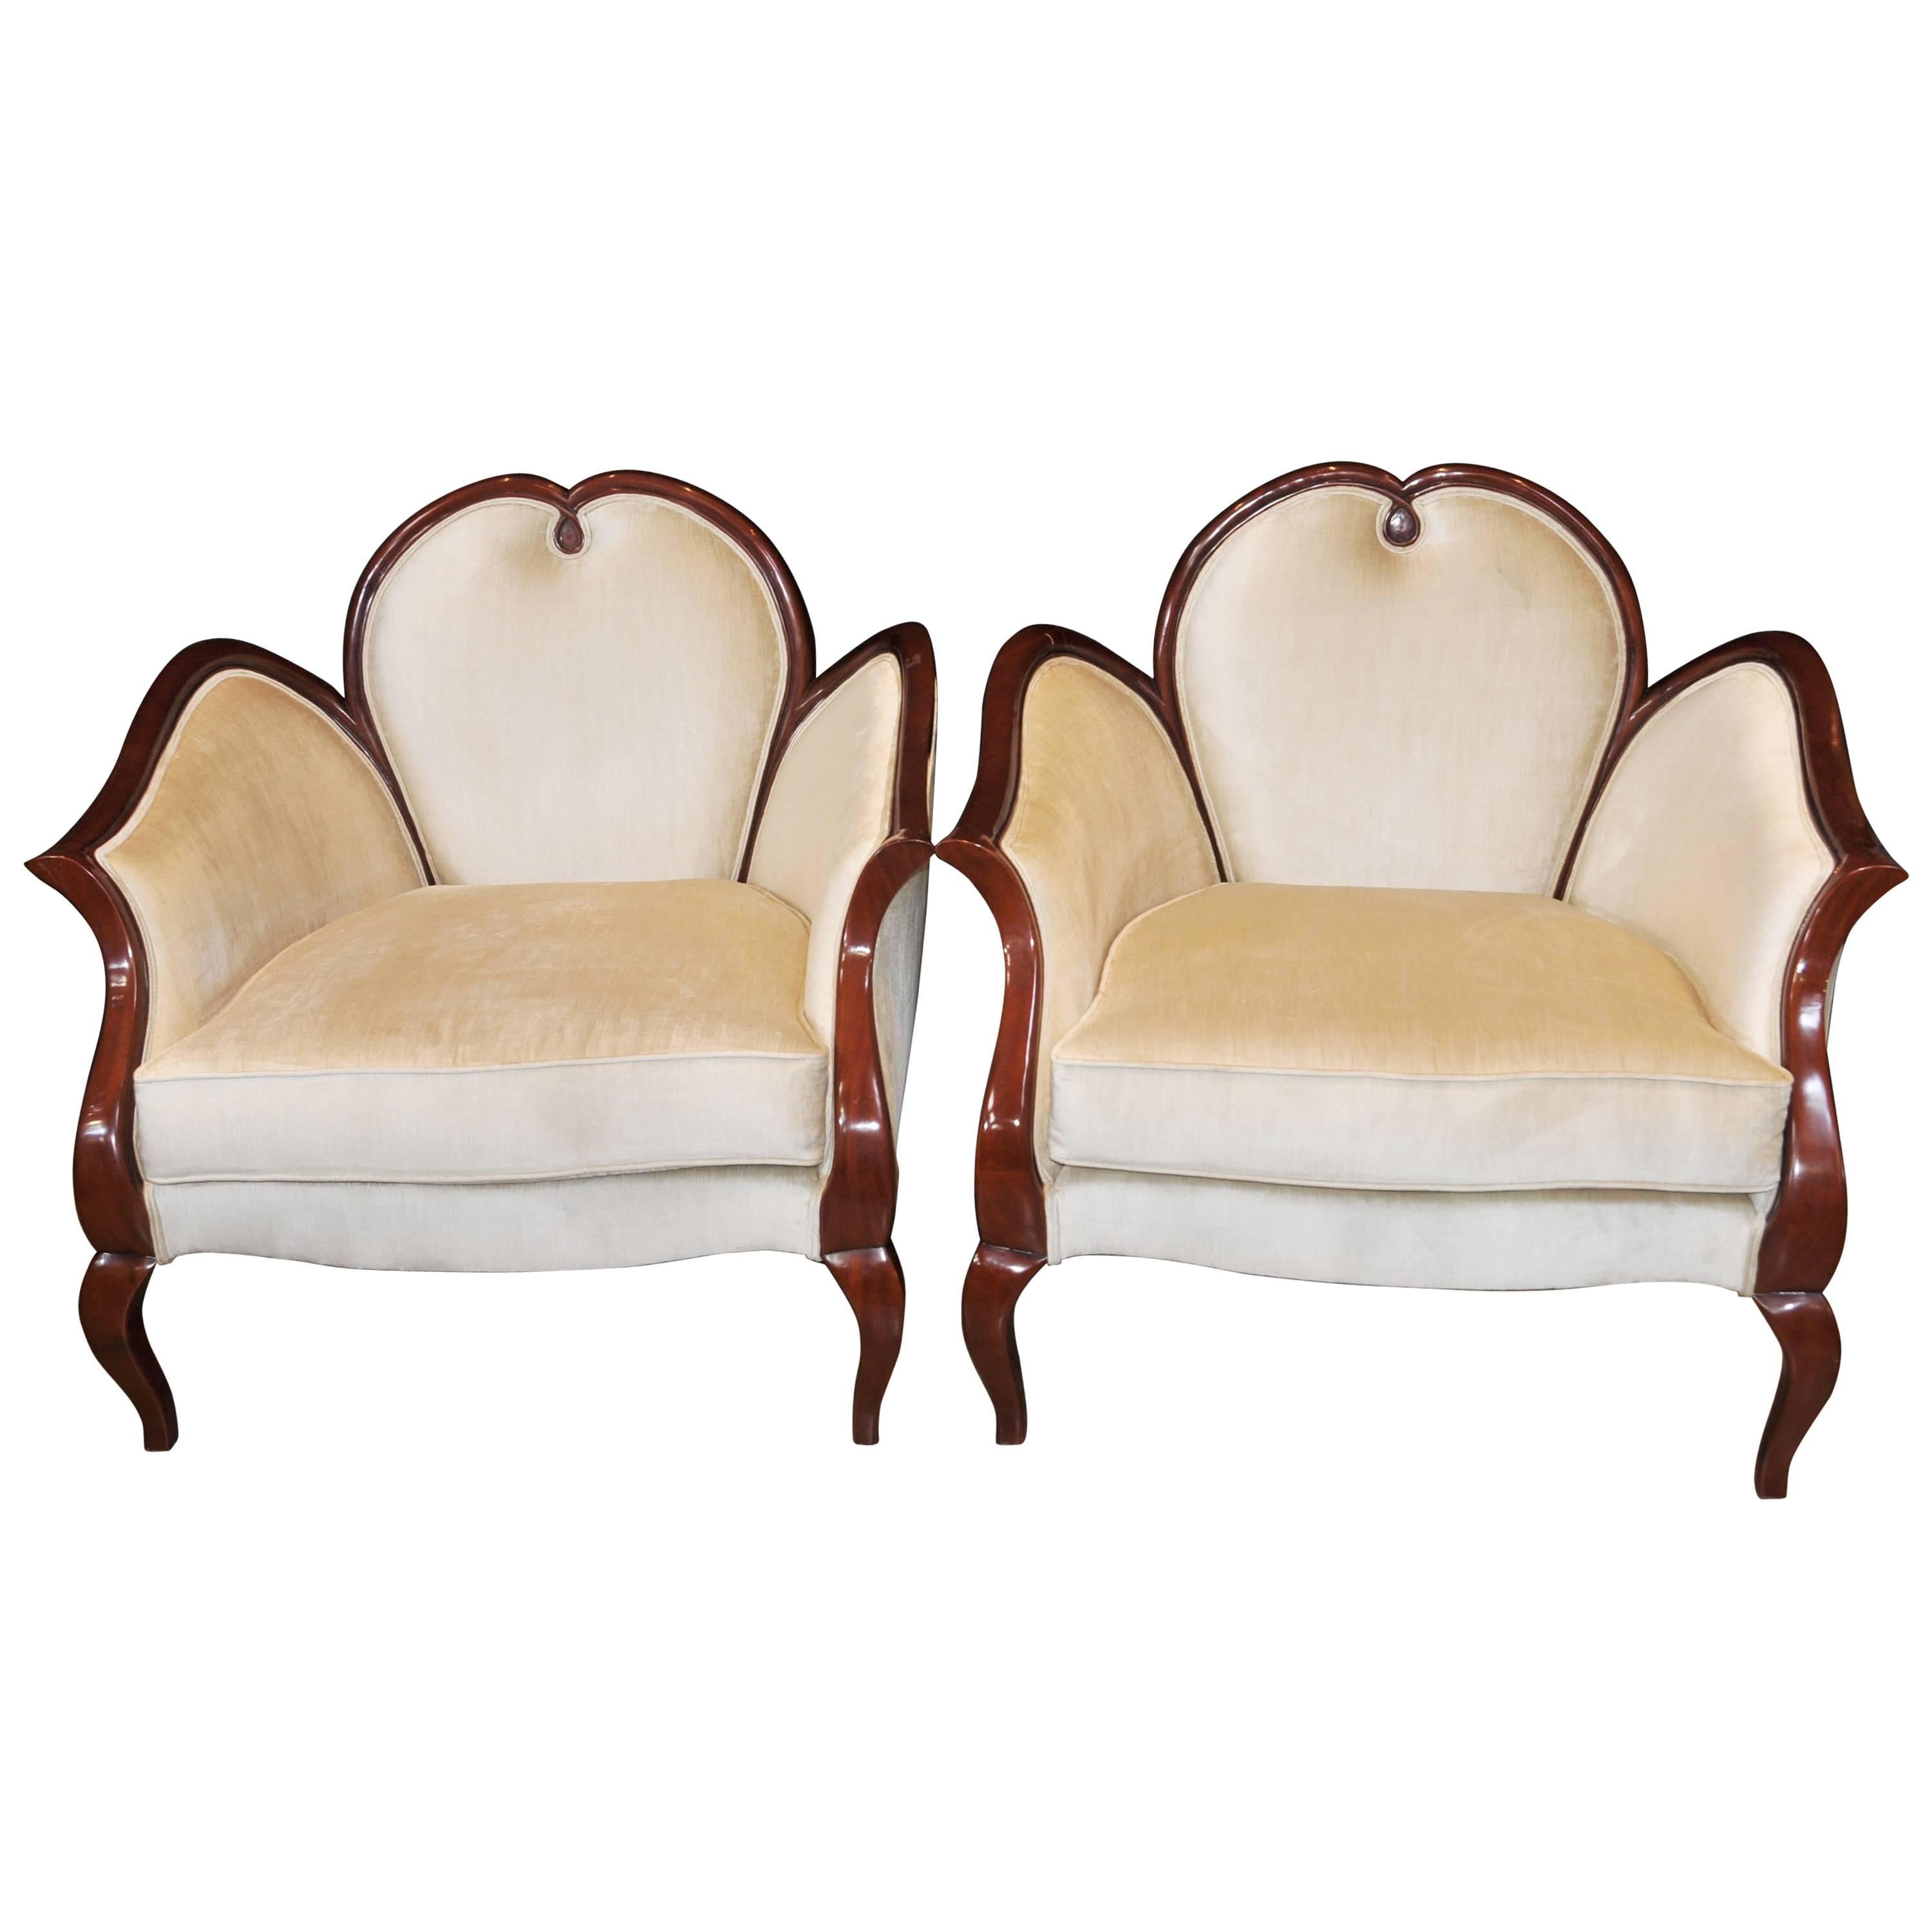 French Empire Style Heart Arm Chairs Fauteils Regency Furniture For Sale